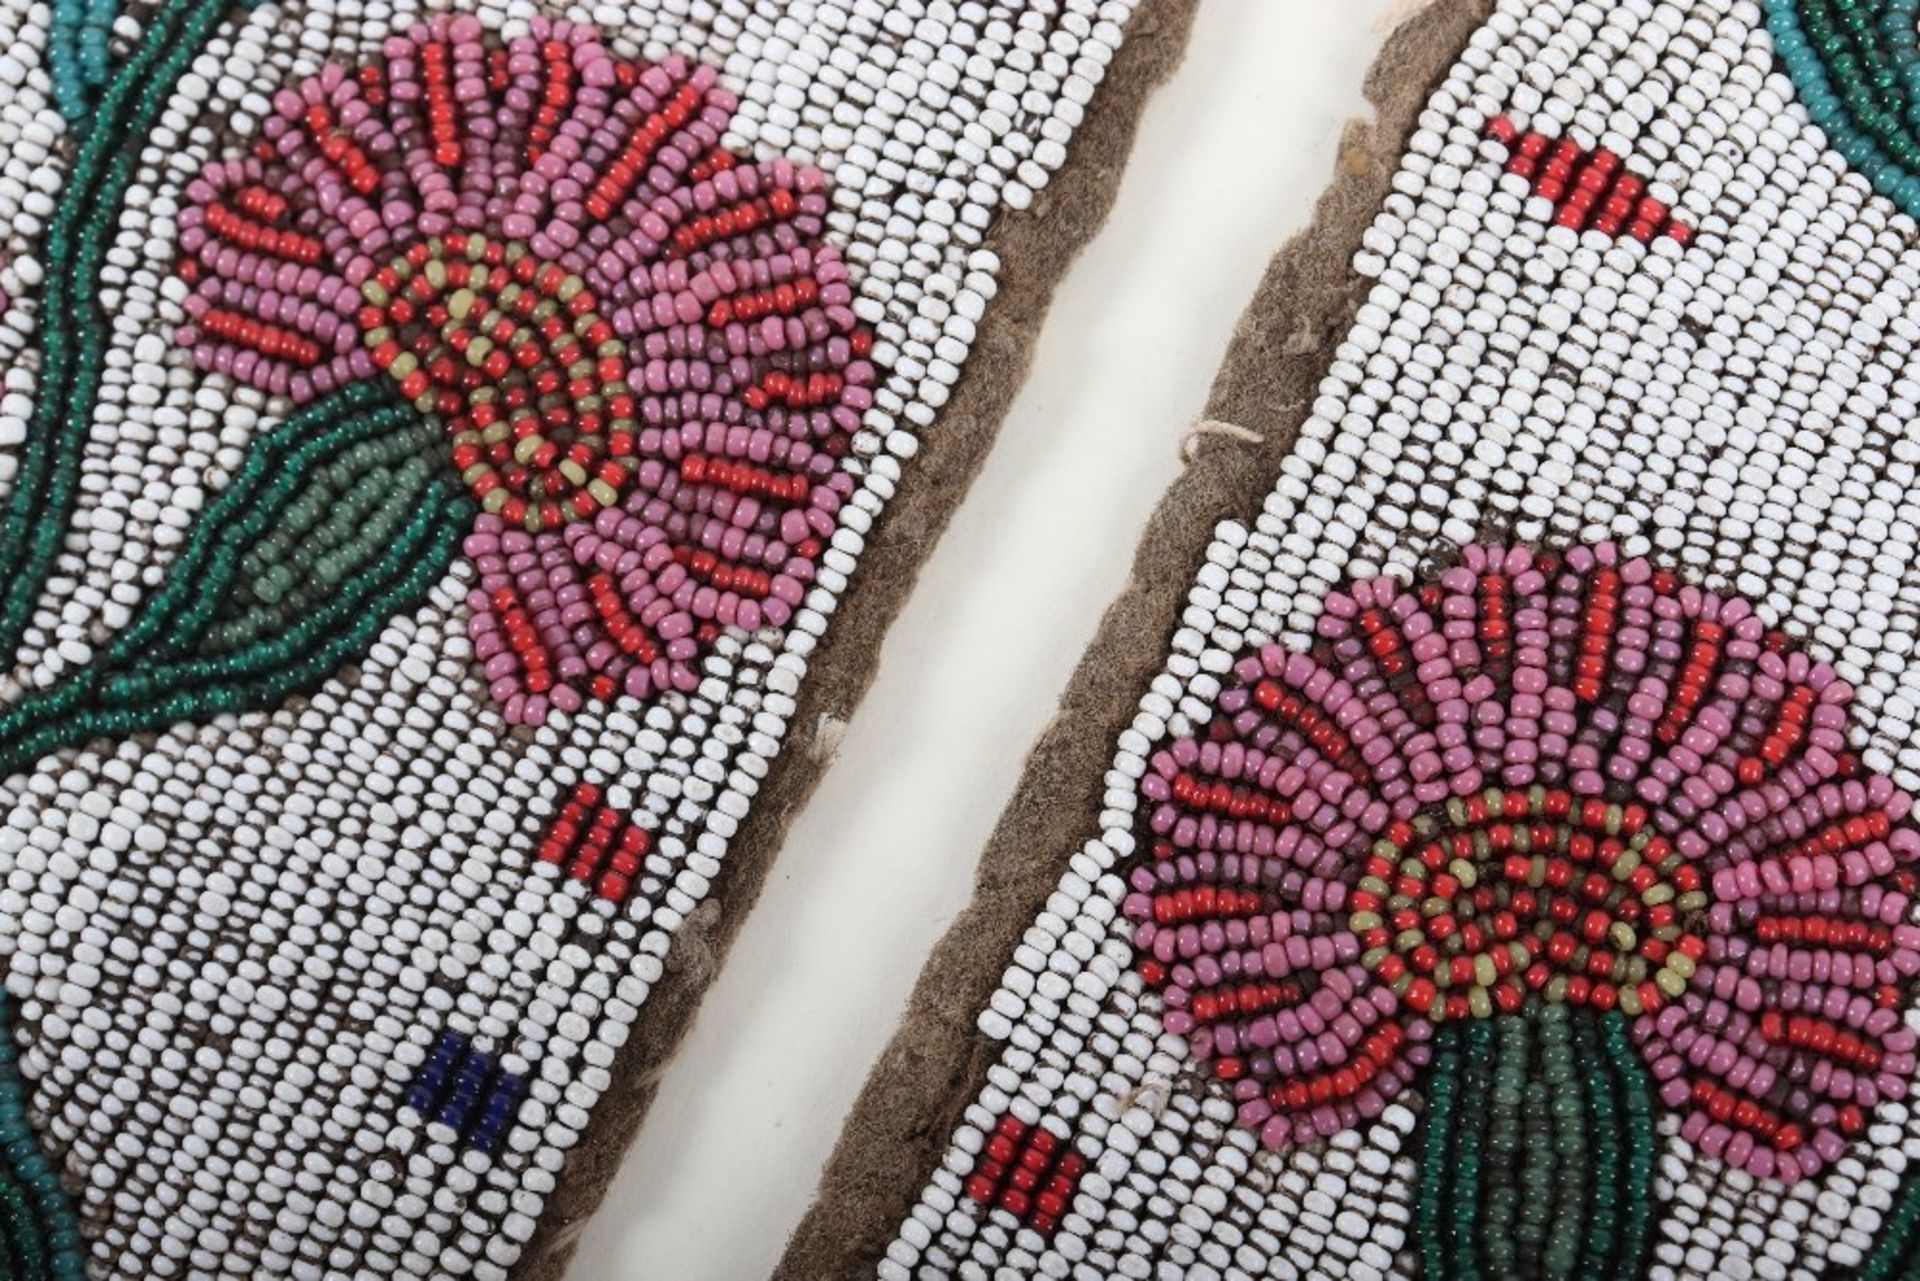 Fine Pair of 19th Century American Plains Indian Beadwork Panels - Image 4 of 7